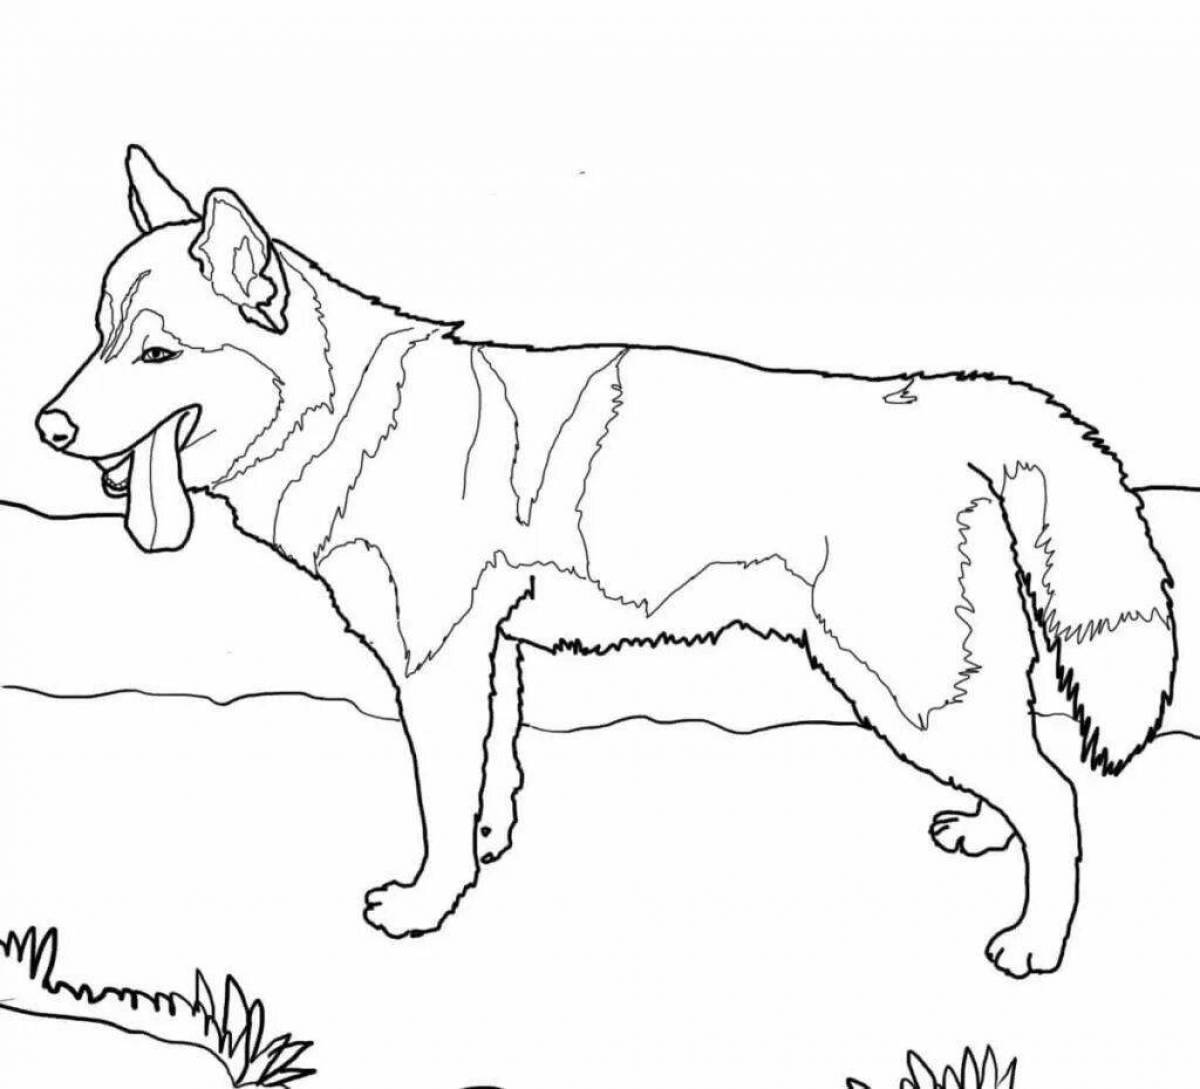 Husky soft coloring book